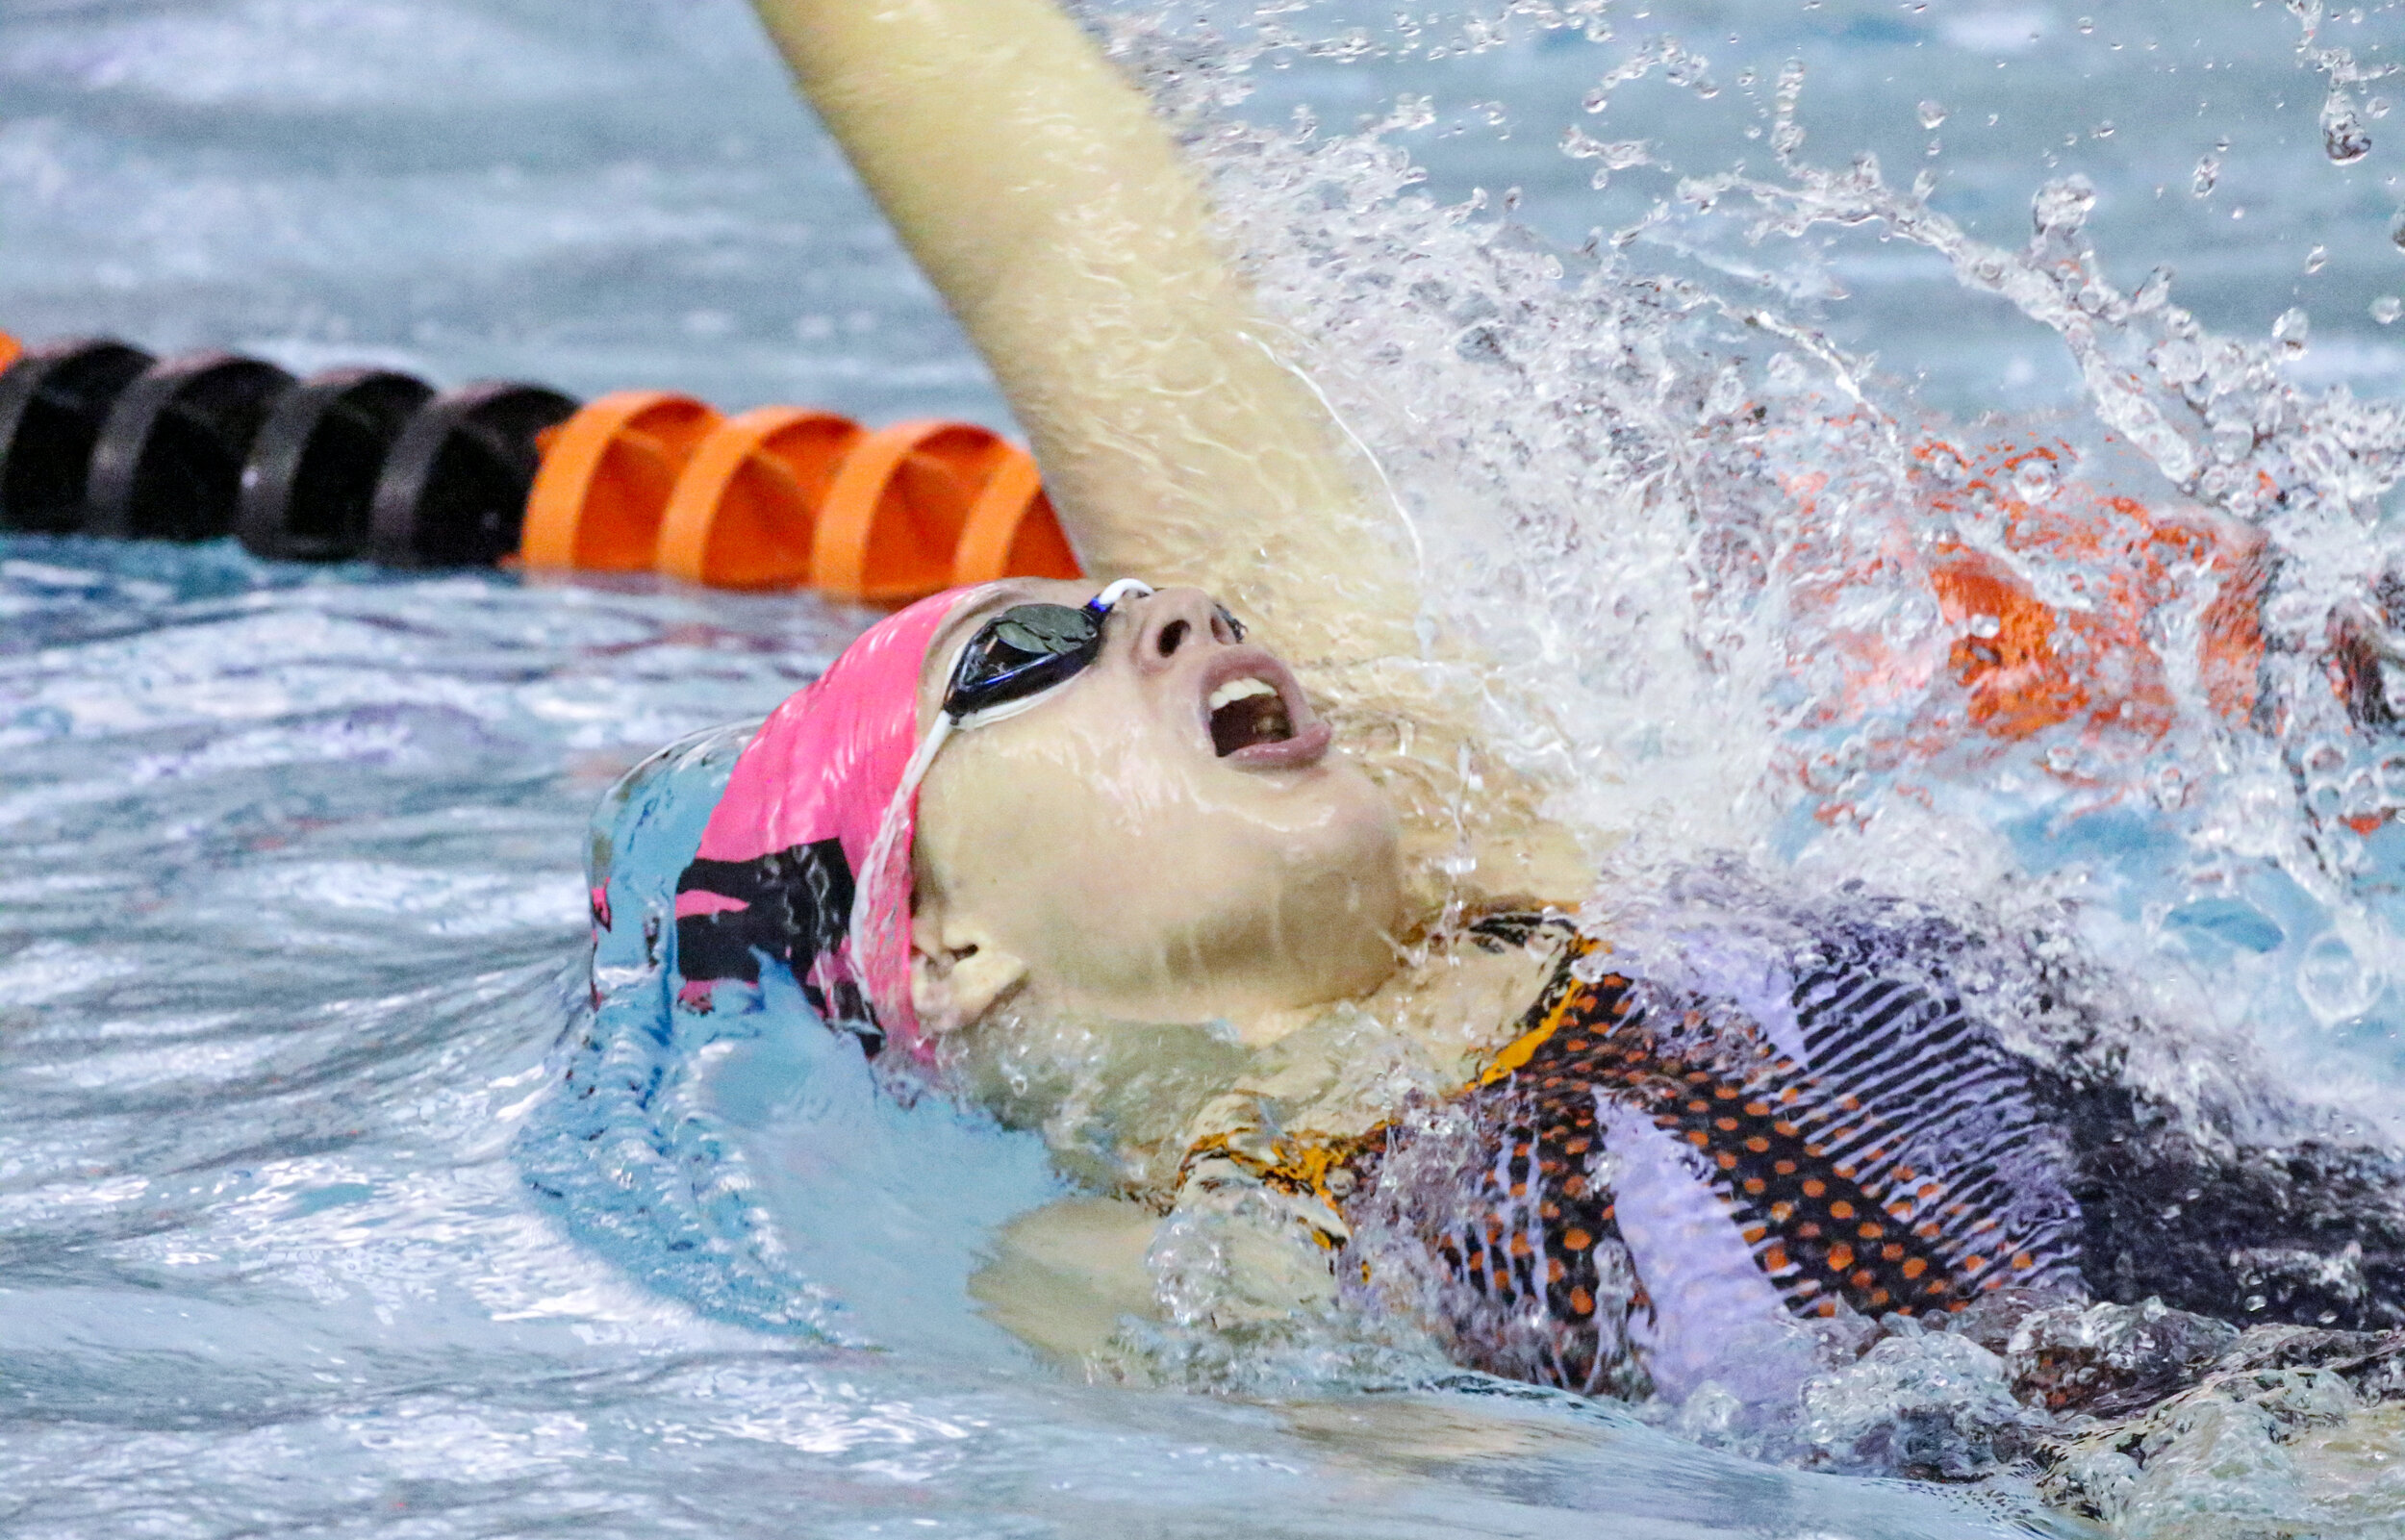  Wellsville’s Tiernee Brandes surfaces for air during the 200 medley relay event of Saturday morning’s regular season finale against Hornell, in Wellsville. [Chris Brooks/WellsvilleSports.com] 